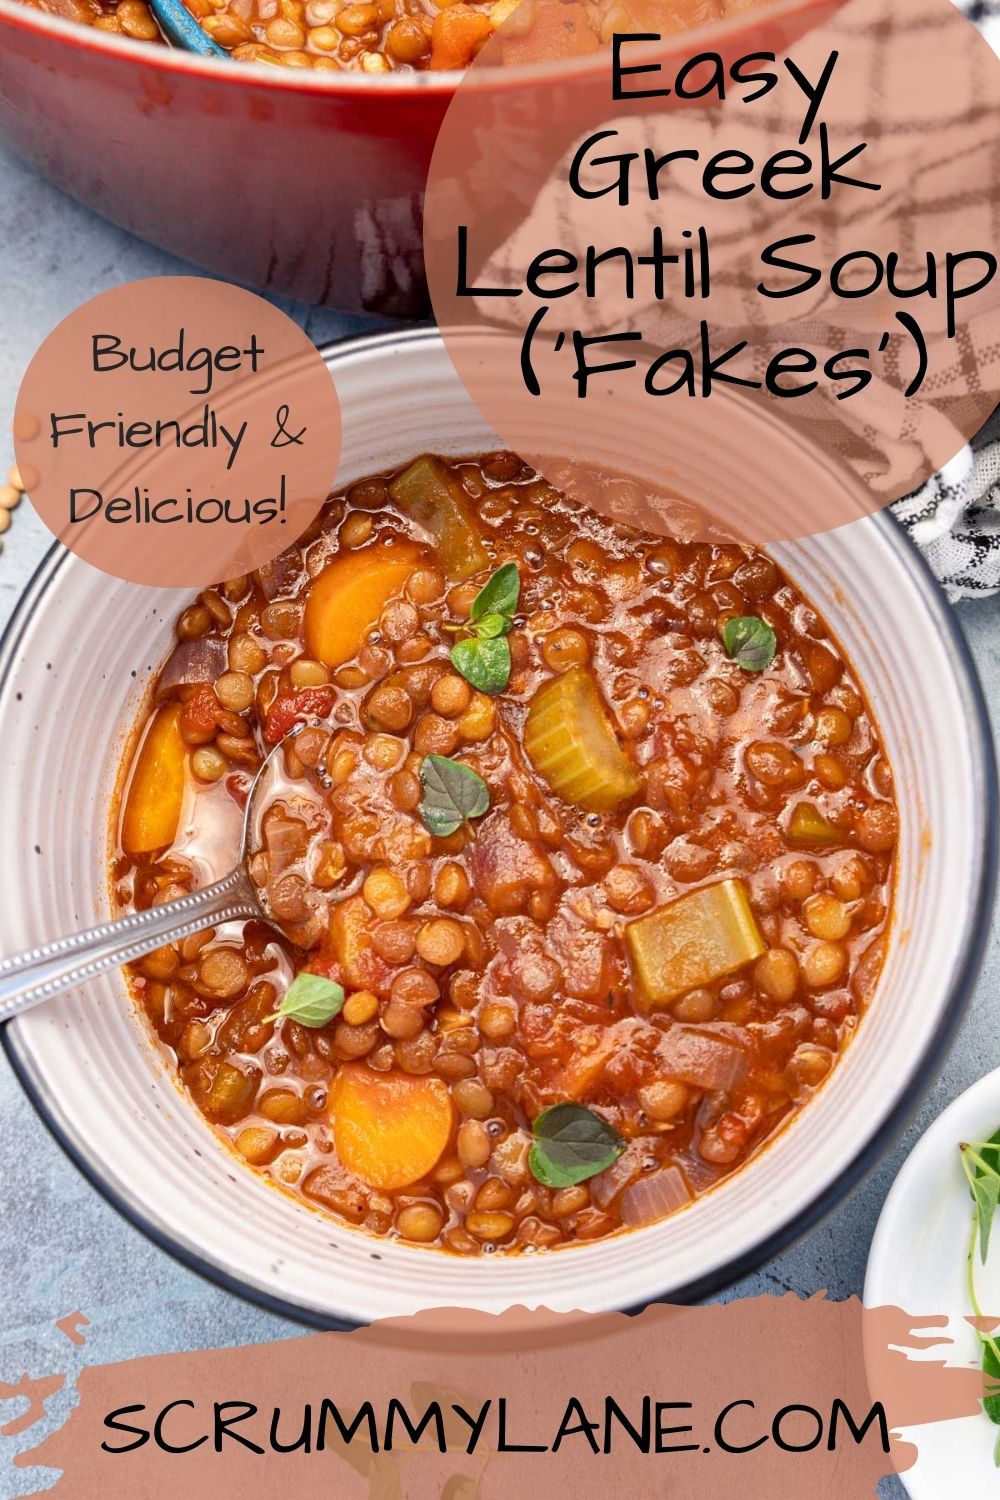 A dish of Greek lentil soup with a spoon in it on a blue background with a title on it for Pinterest.